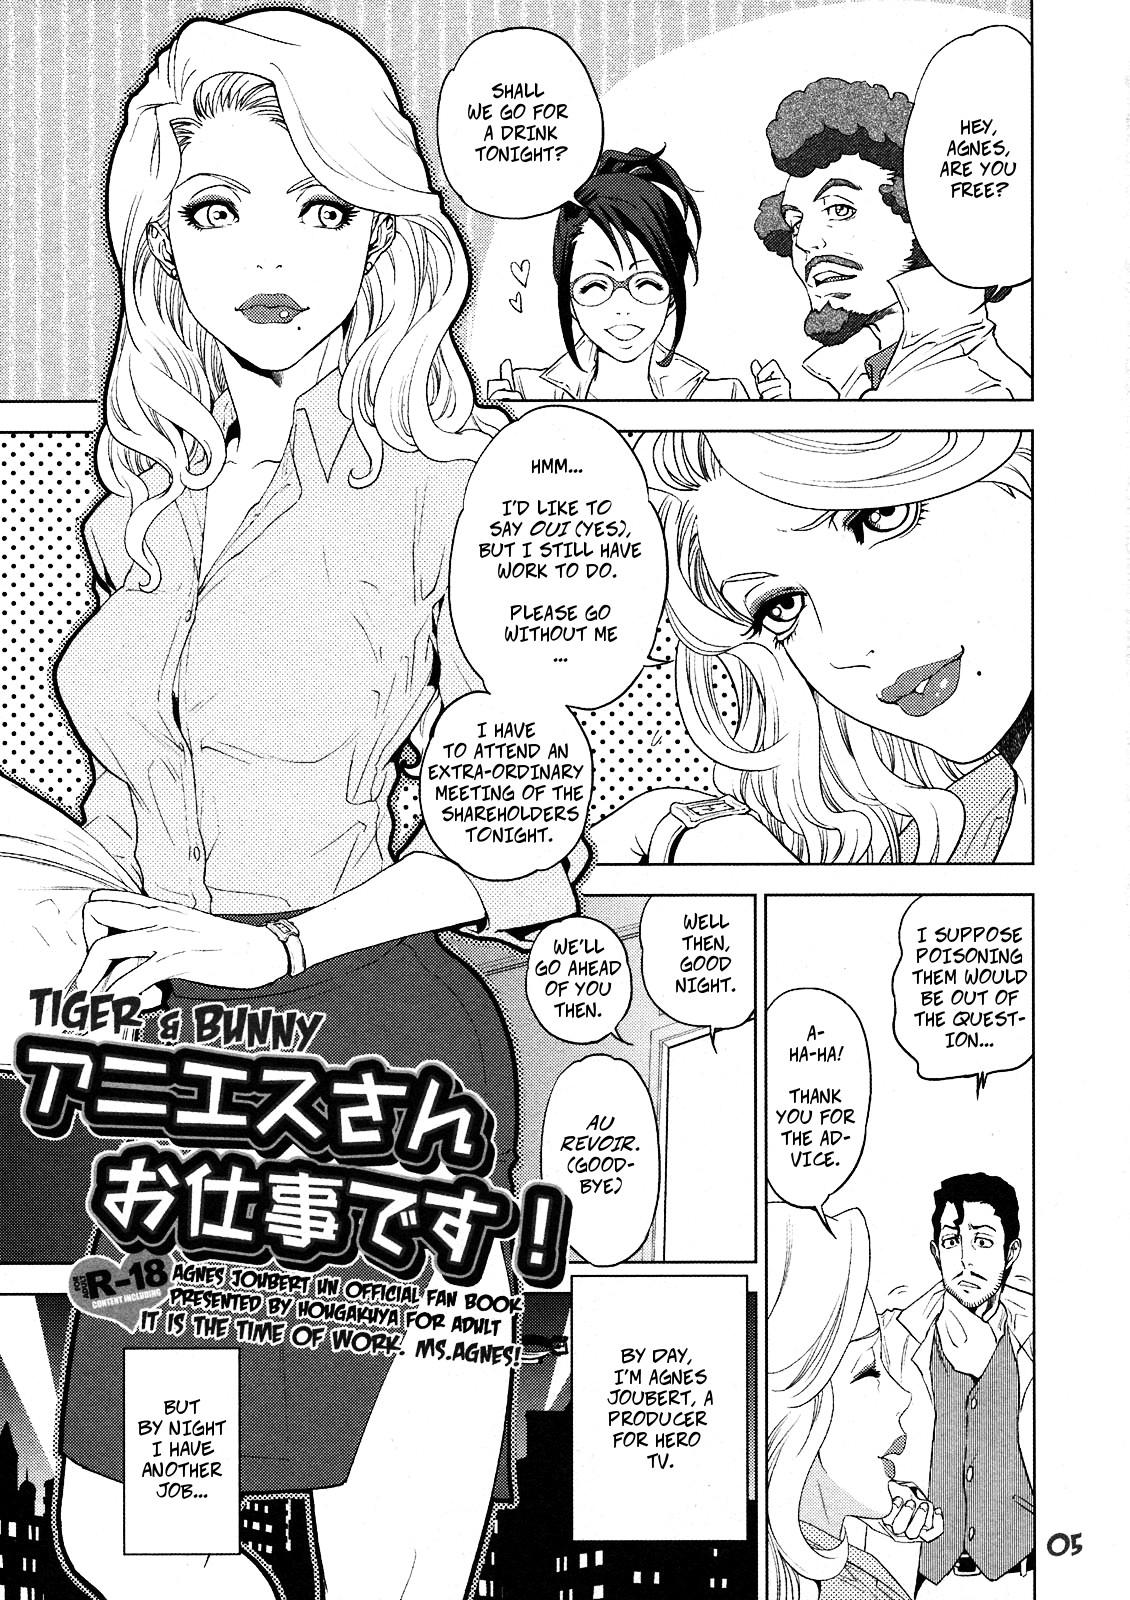 Analfucking Agnes-san Oshigoto desu! | It's Time For Work, Ms. Agnes! - Tiger and bunny Soloboy - Page 5